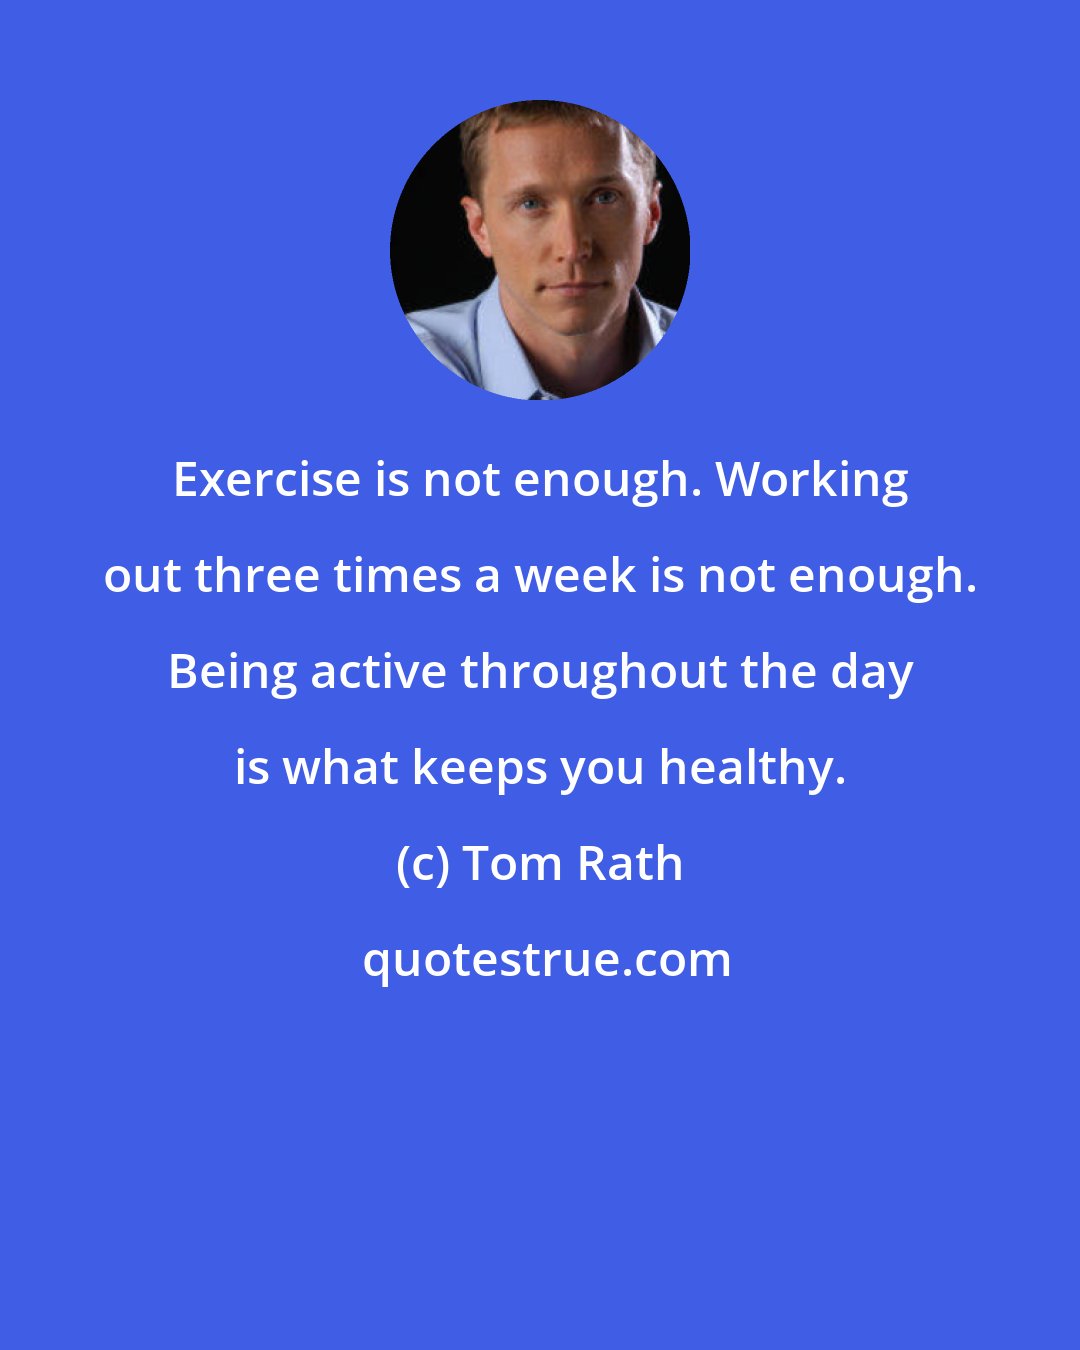 Tom Rath: Exercise is not enough. Working out three times a week is not enough. Being active throughout the day is what keeps you healthy.